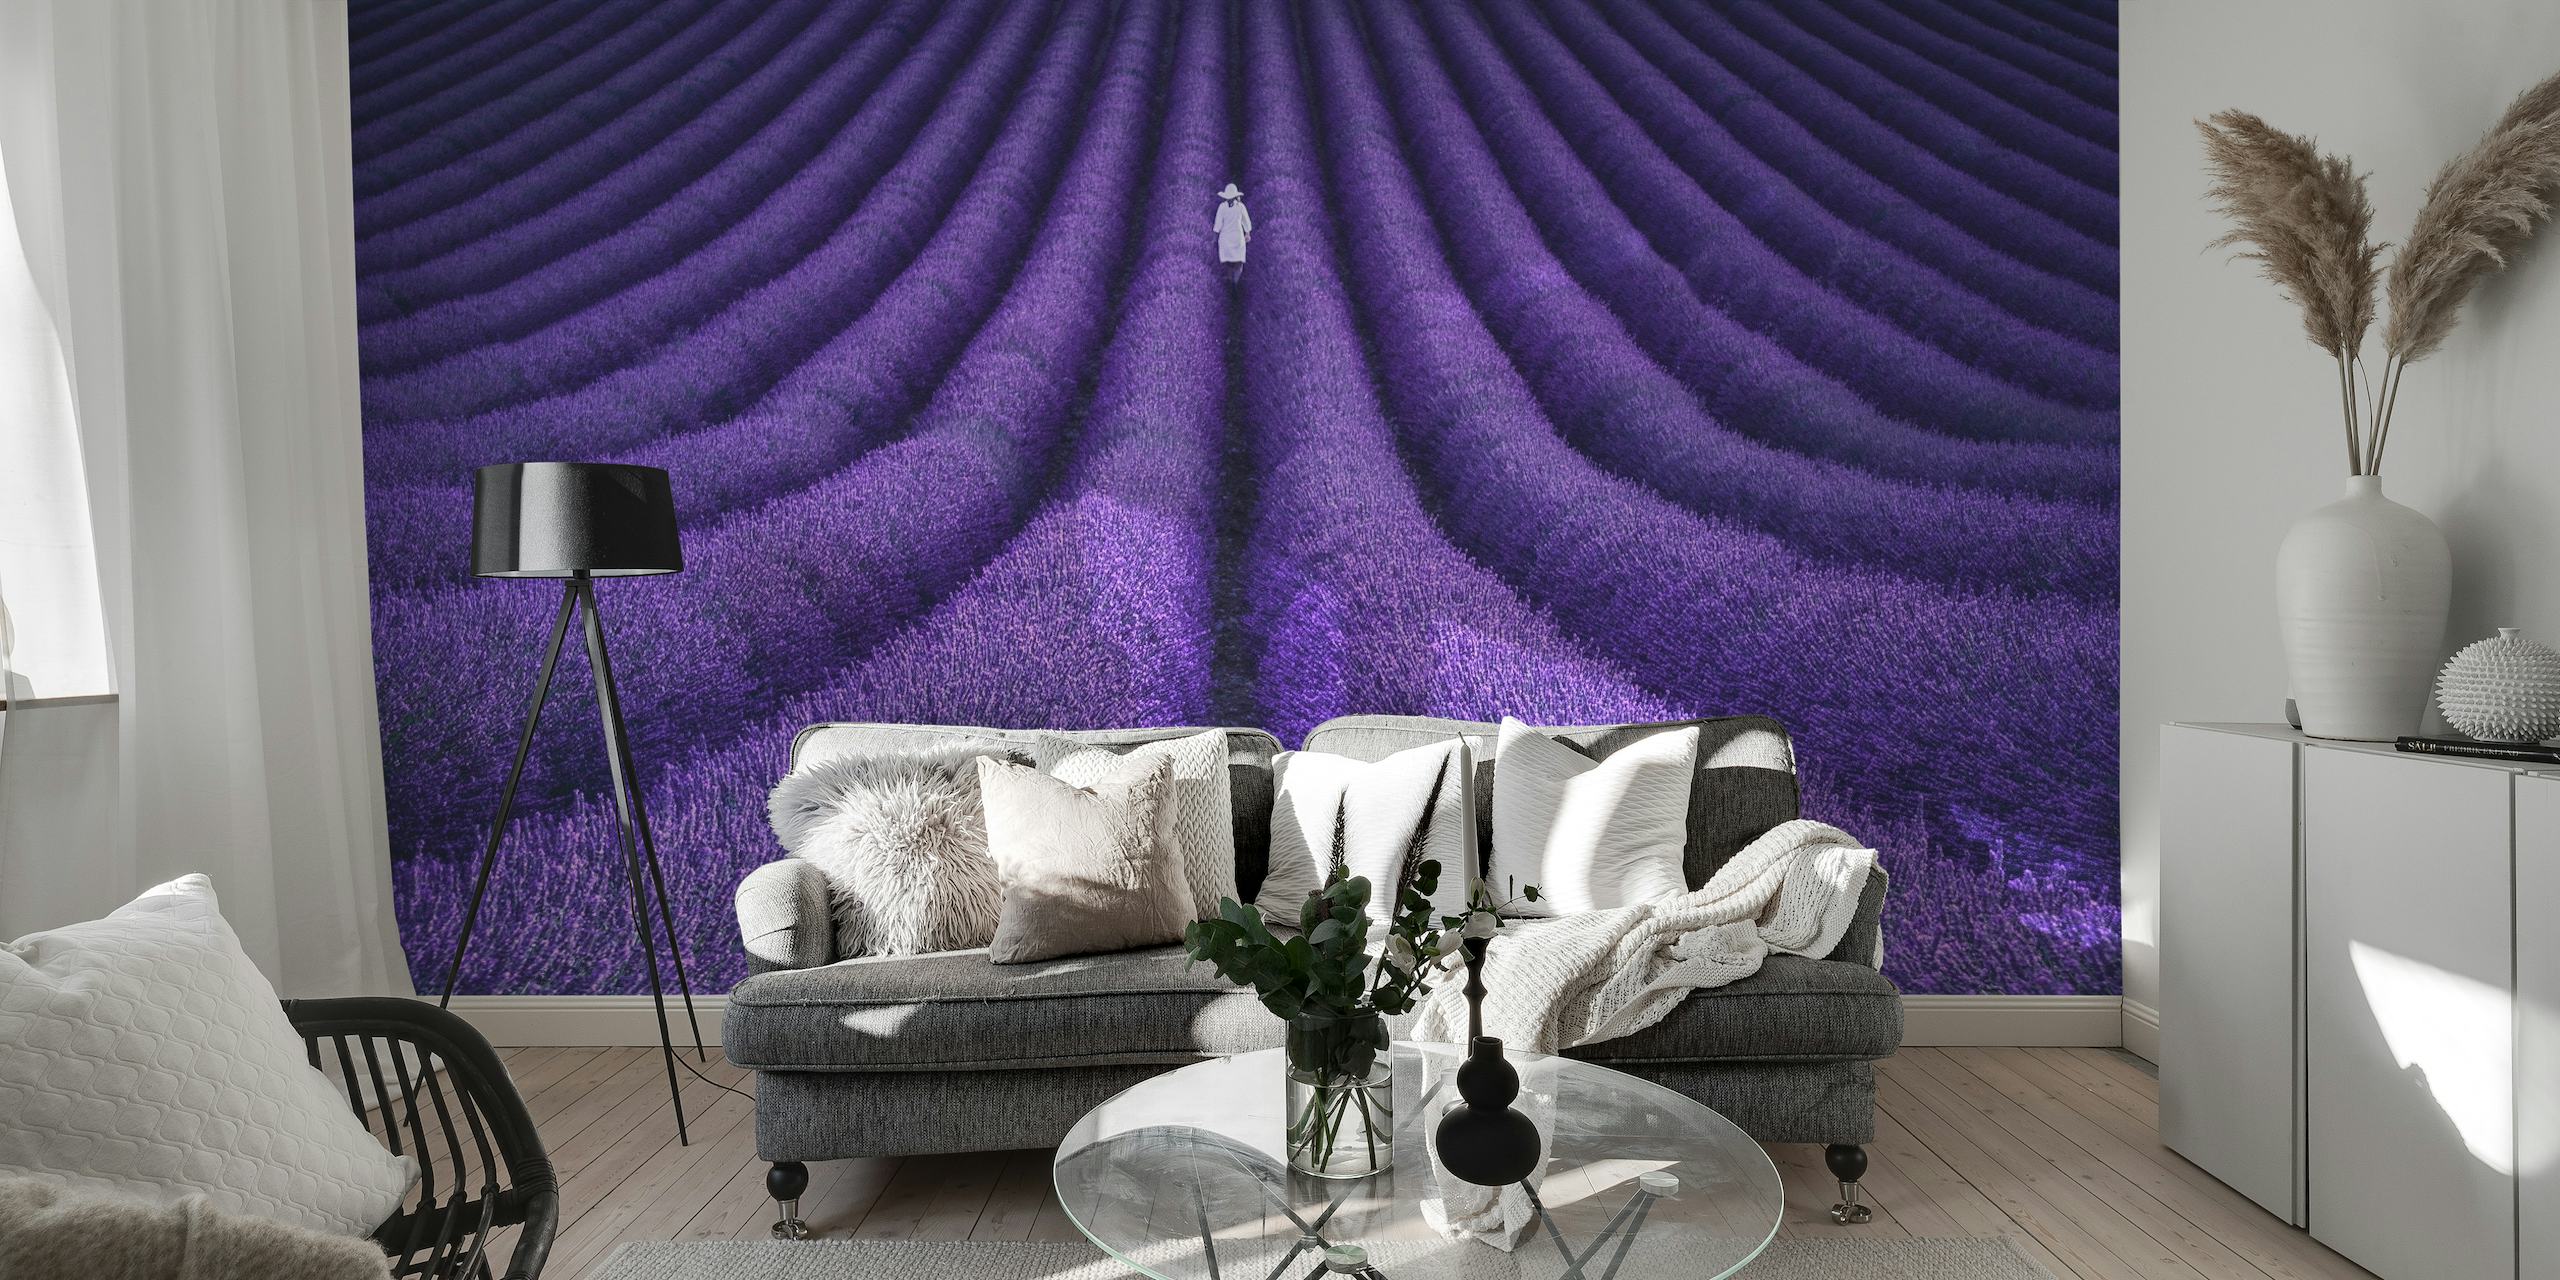 Lavender field wall mural with a solitary figure